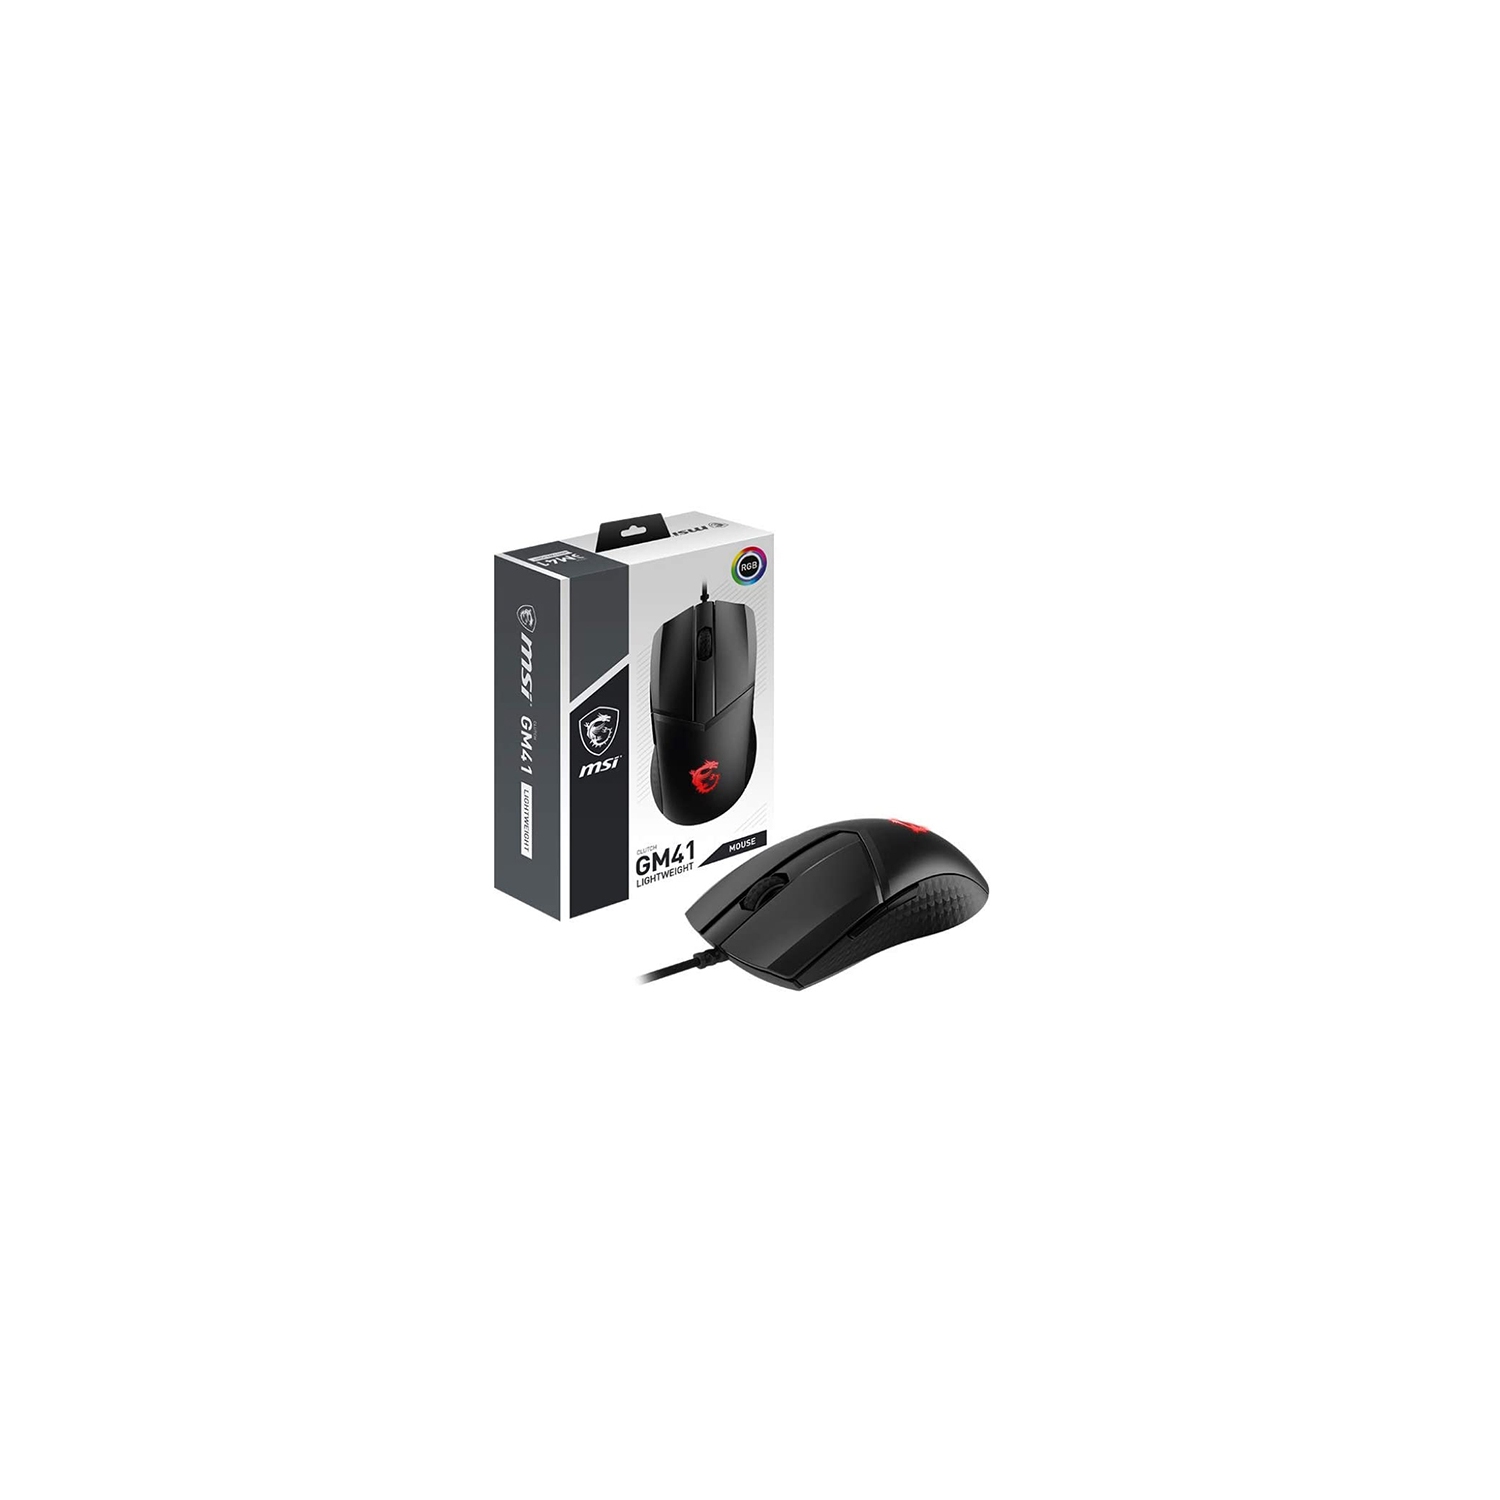 MSI Clutch GM41 Wired USB Lightweight Gaming Mouse, 16,000 DPI, 60M Omron Switches, RGB Mystic Light, 6 Programmable Buttons, PC/Mac